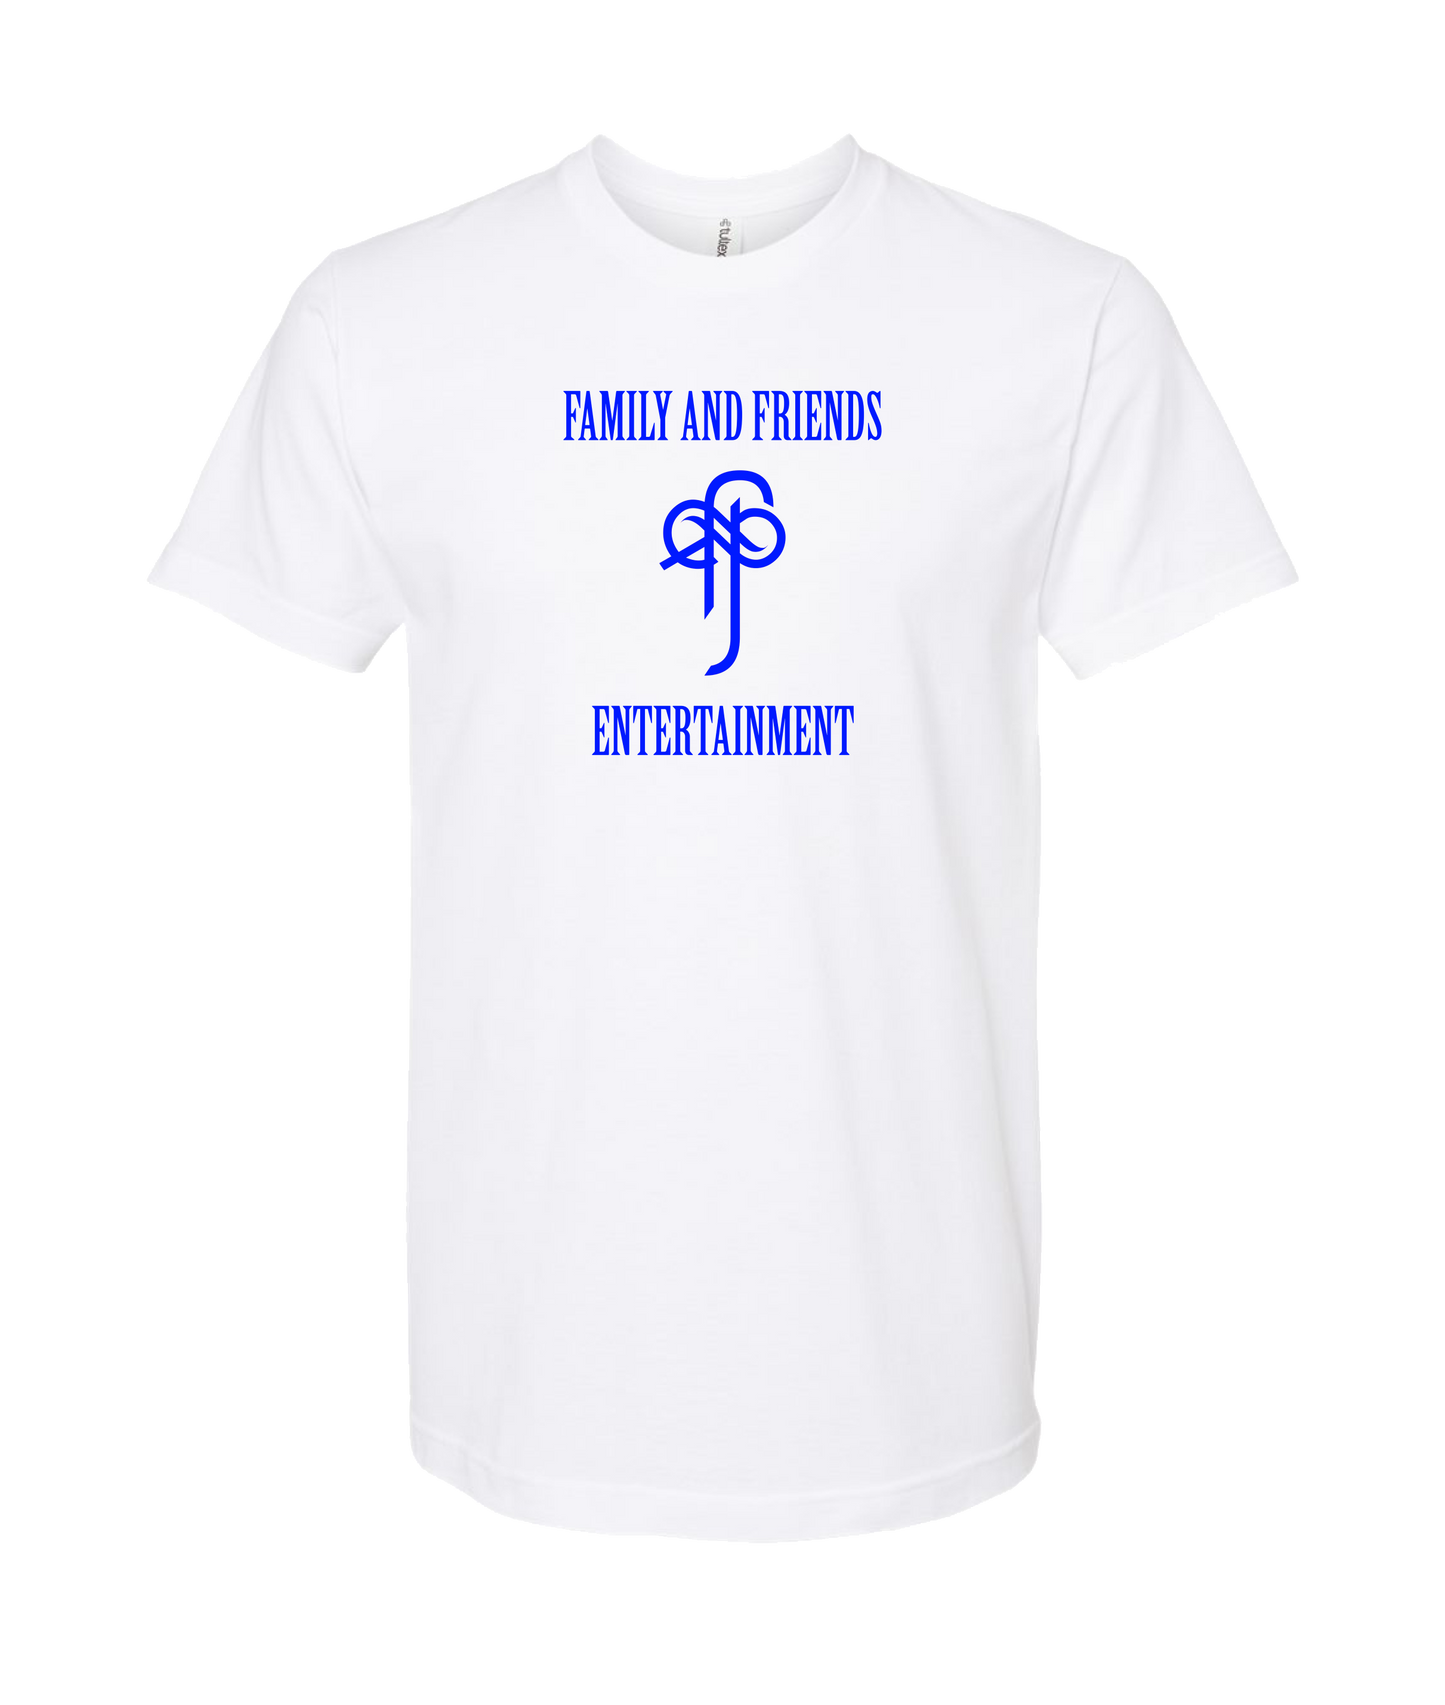 Sincrawford - Family and Friends Ent. (Blue) - White T Shirt